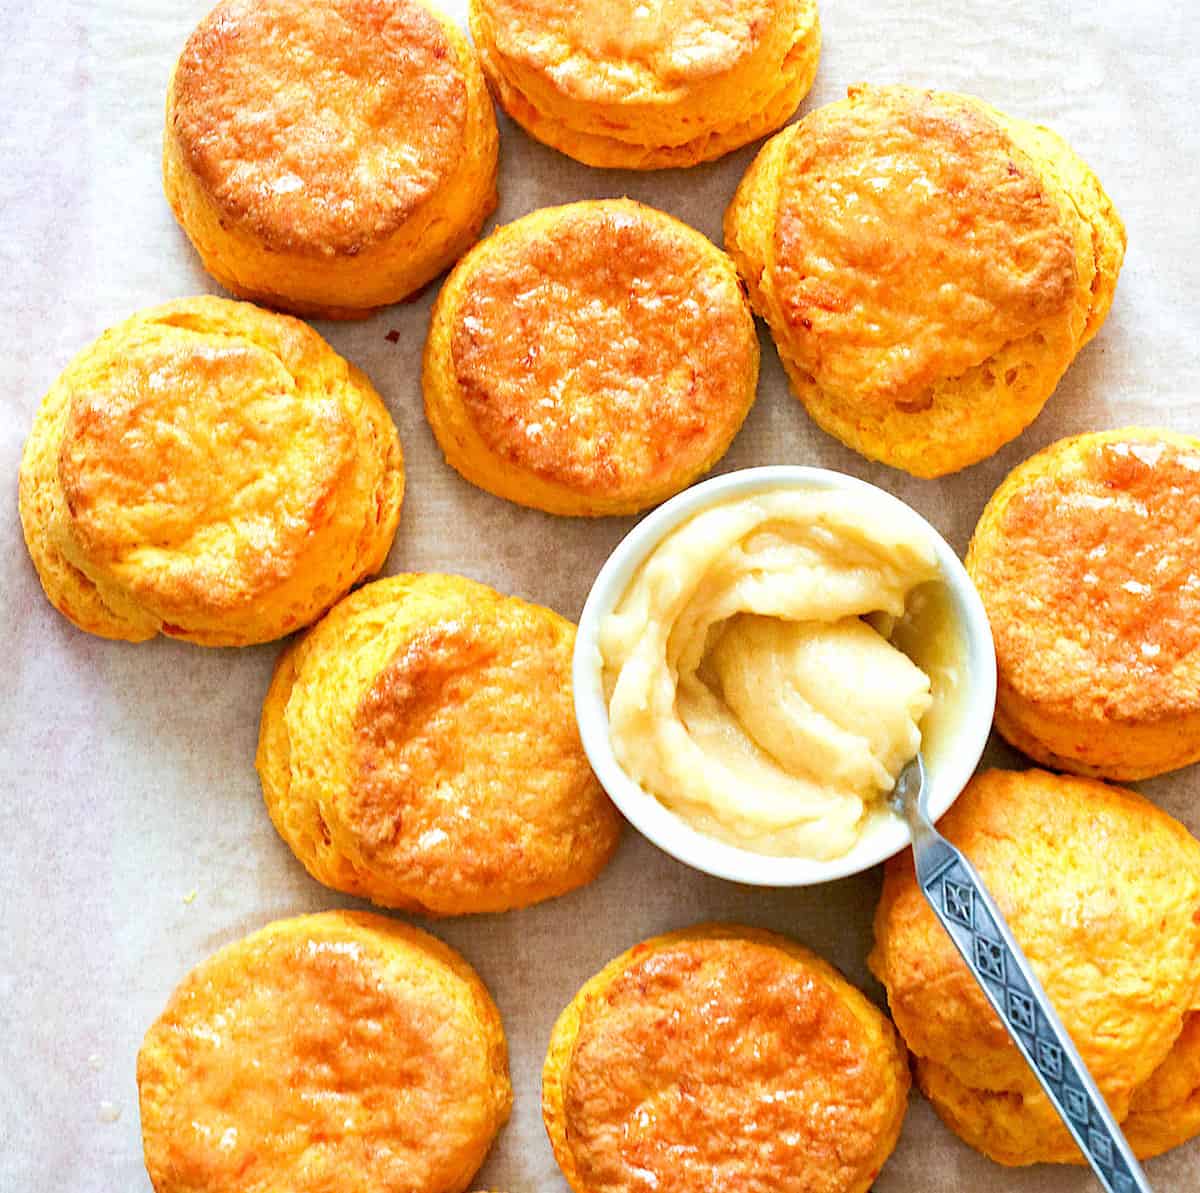 Delicious and fresh from the oven sweet potato biscuits